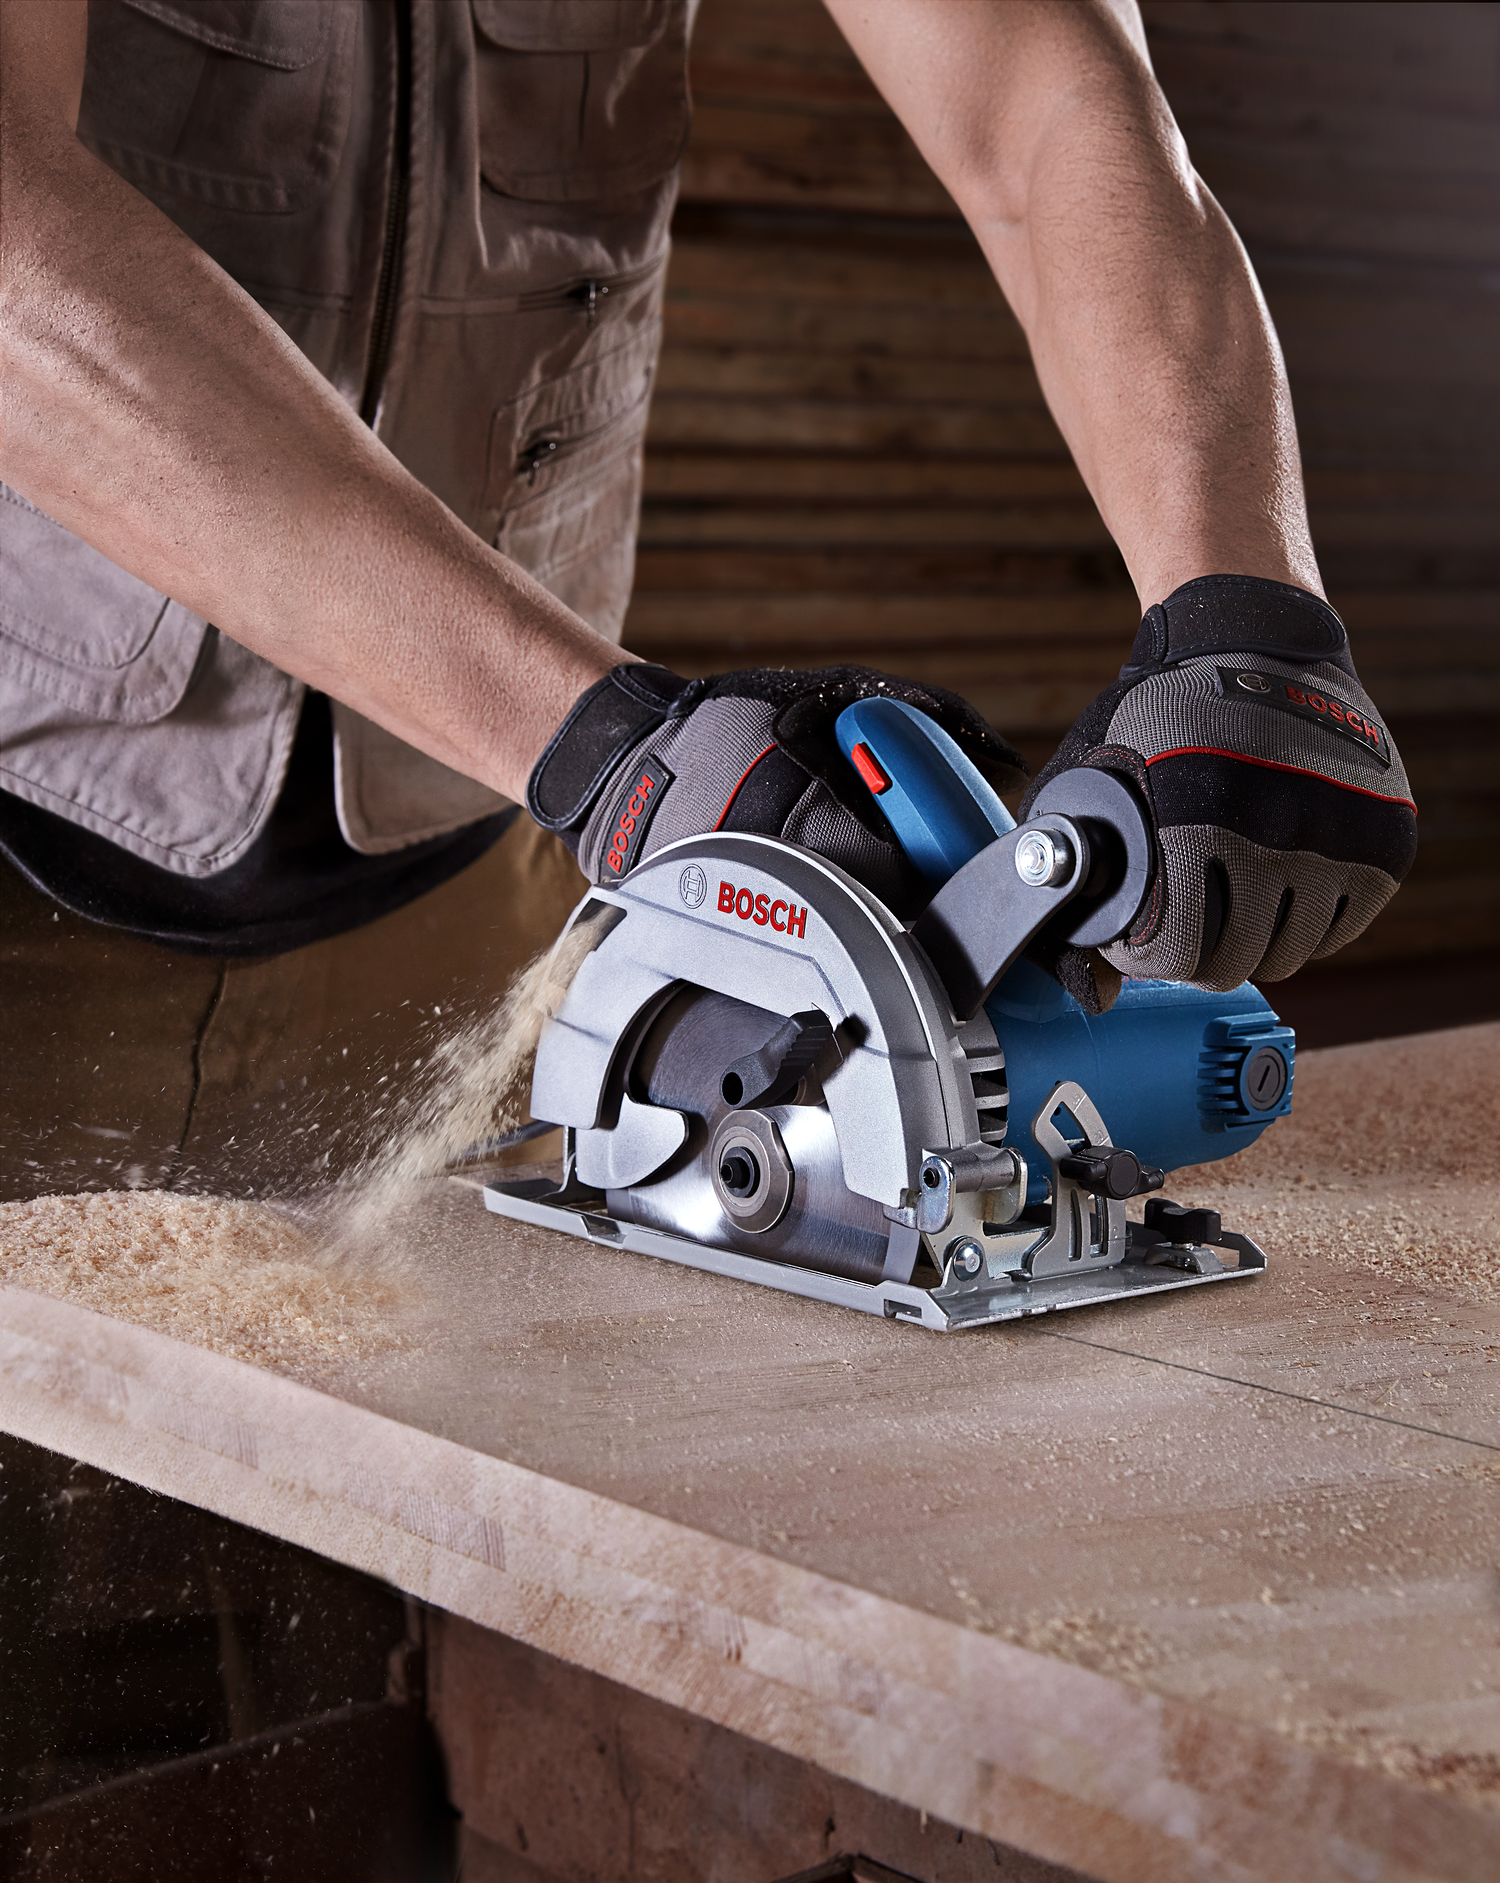 Bosch Professional GKS 600 Daire Testere